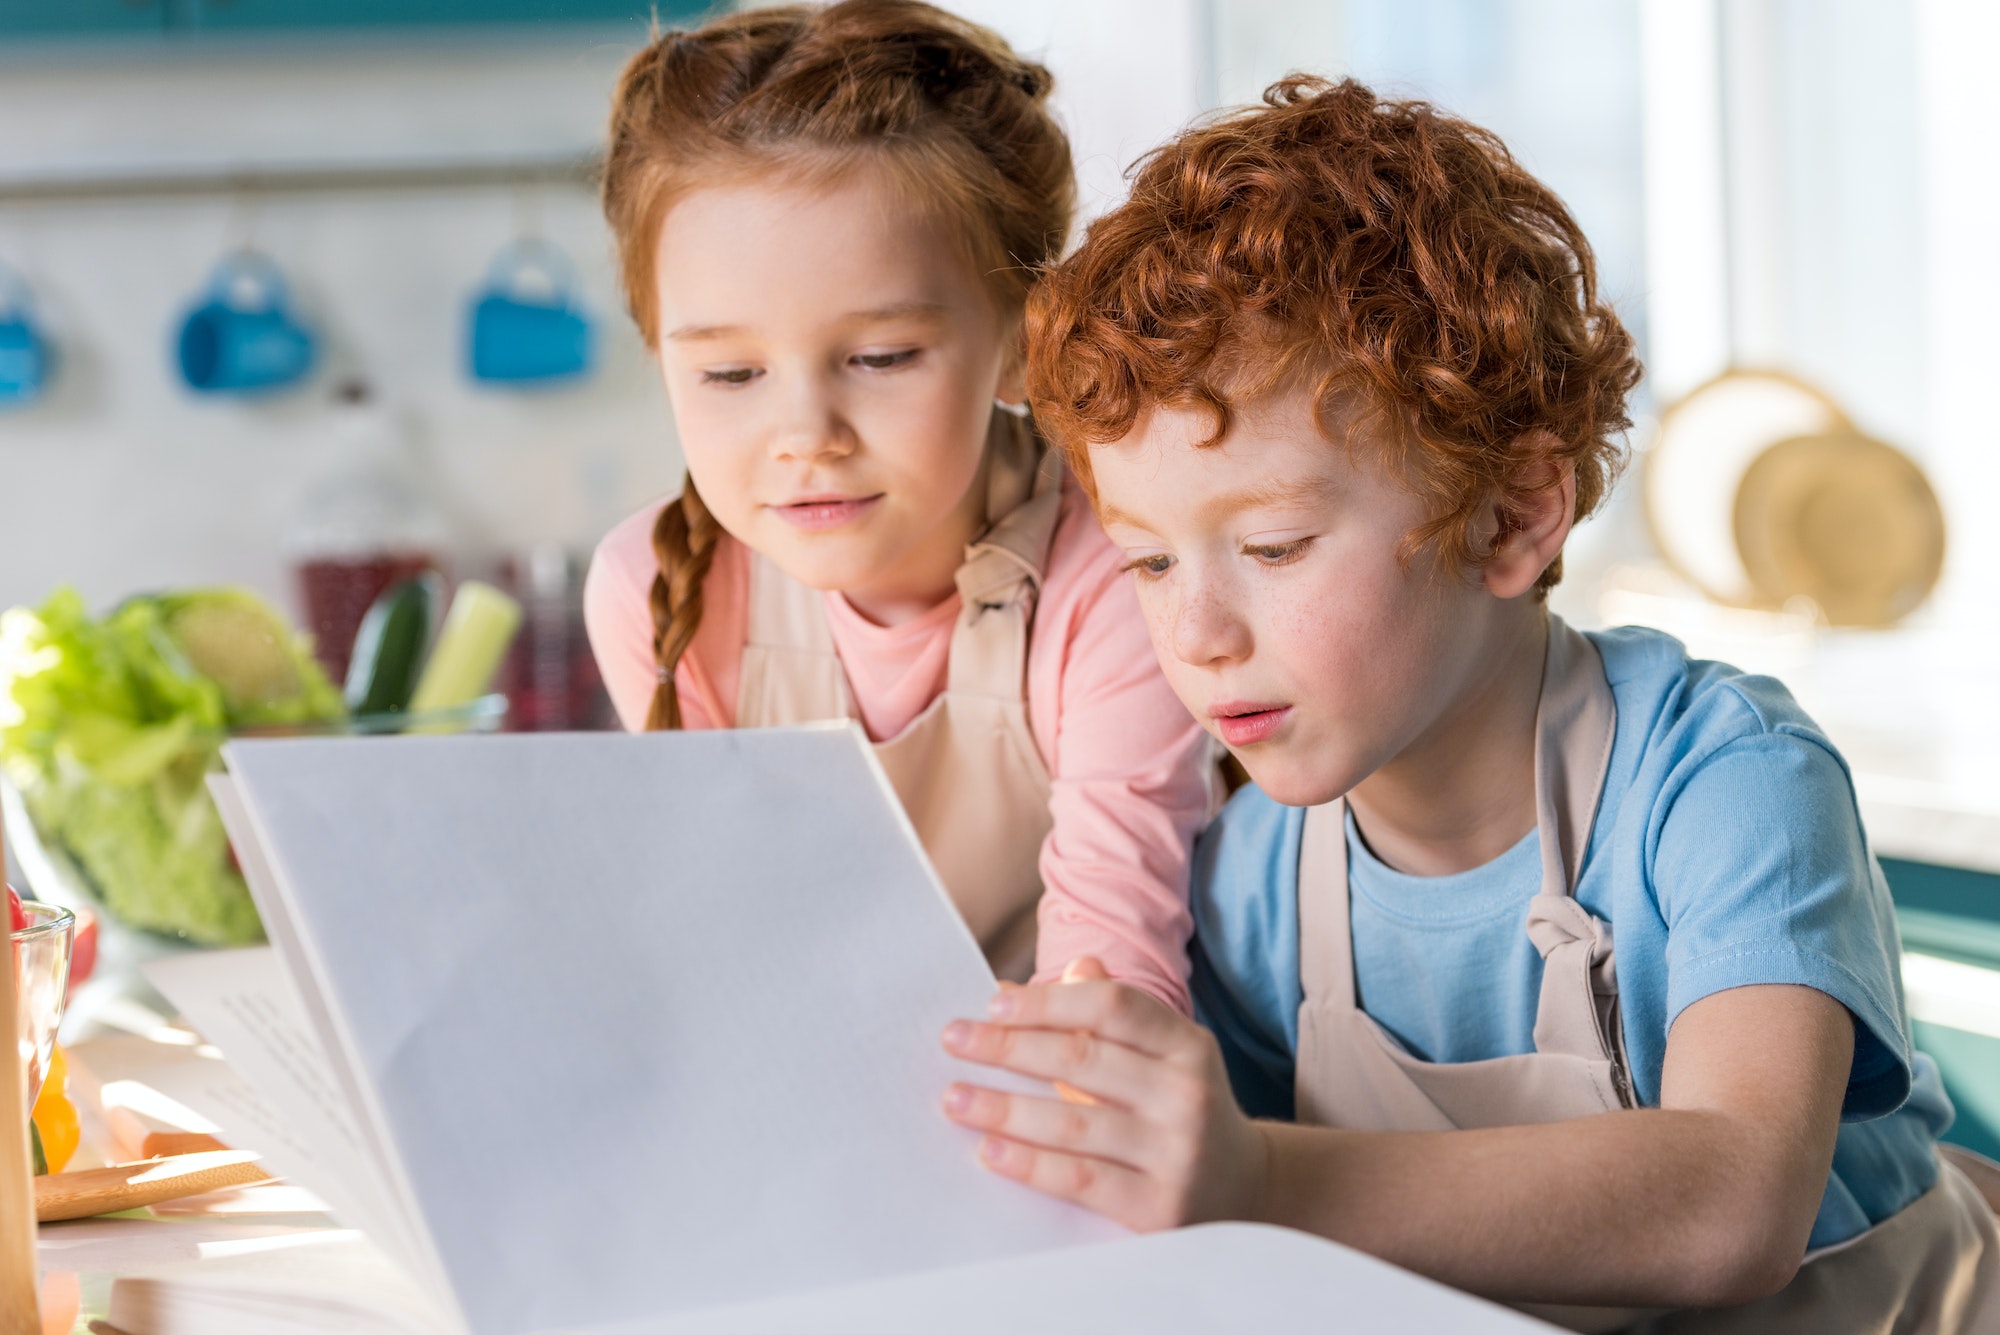 focused little kids reading cookbook while cooking together in kitchen